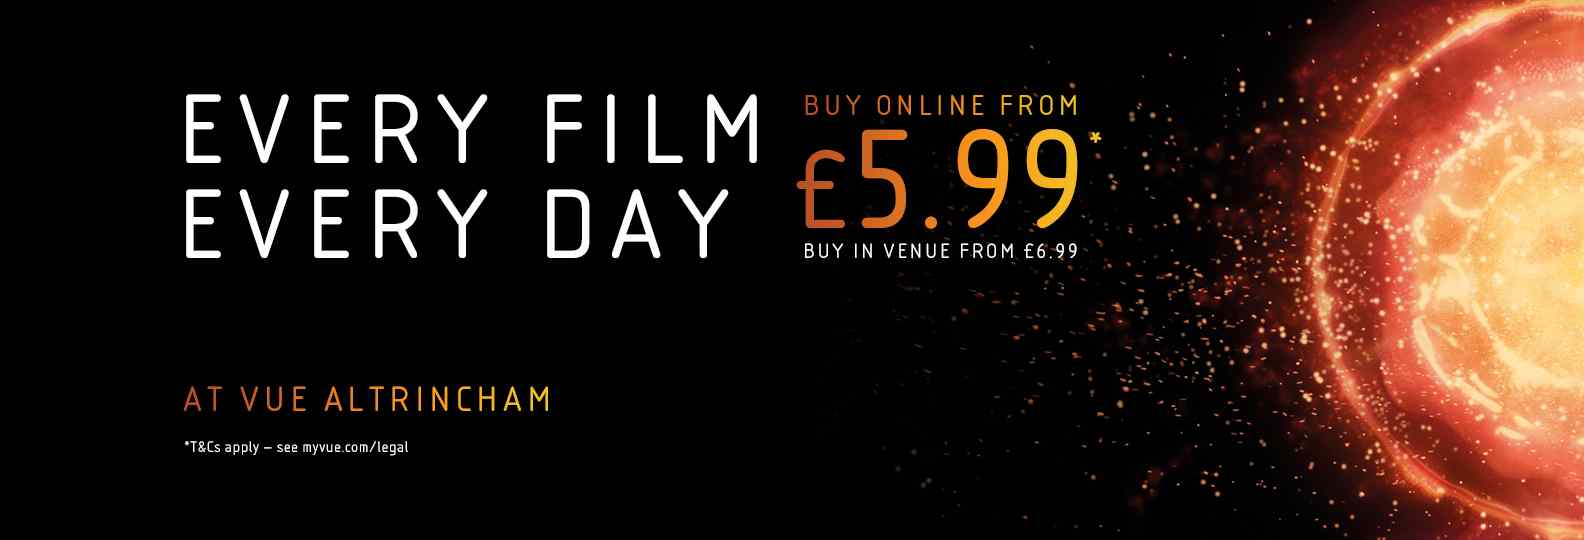 Vue Altrincham | Every Film, Every Day from £4.99